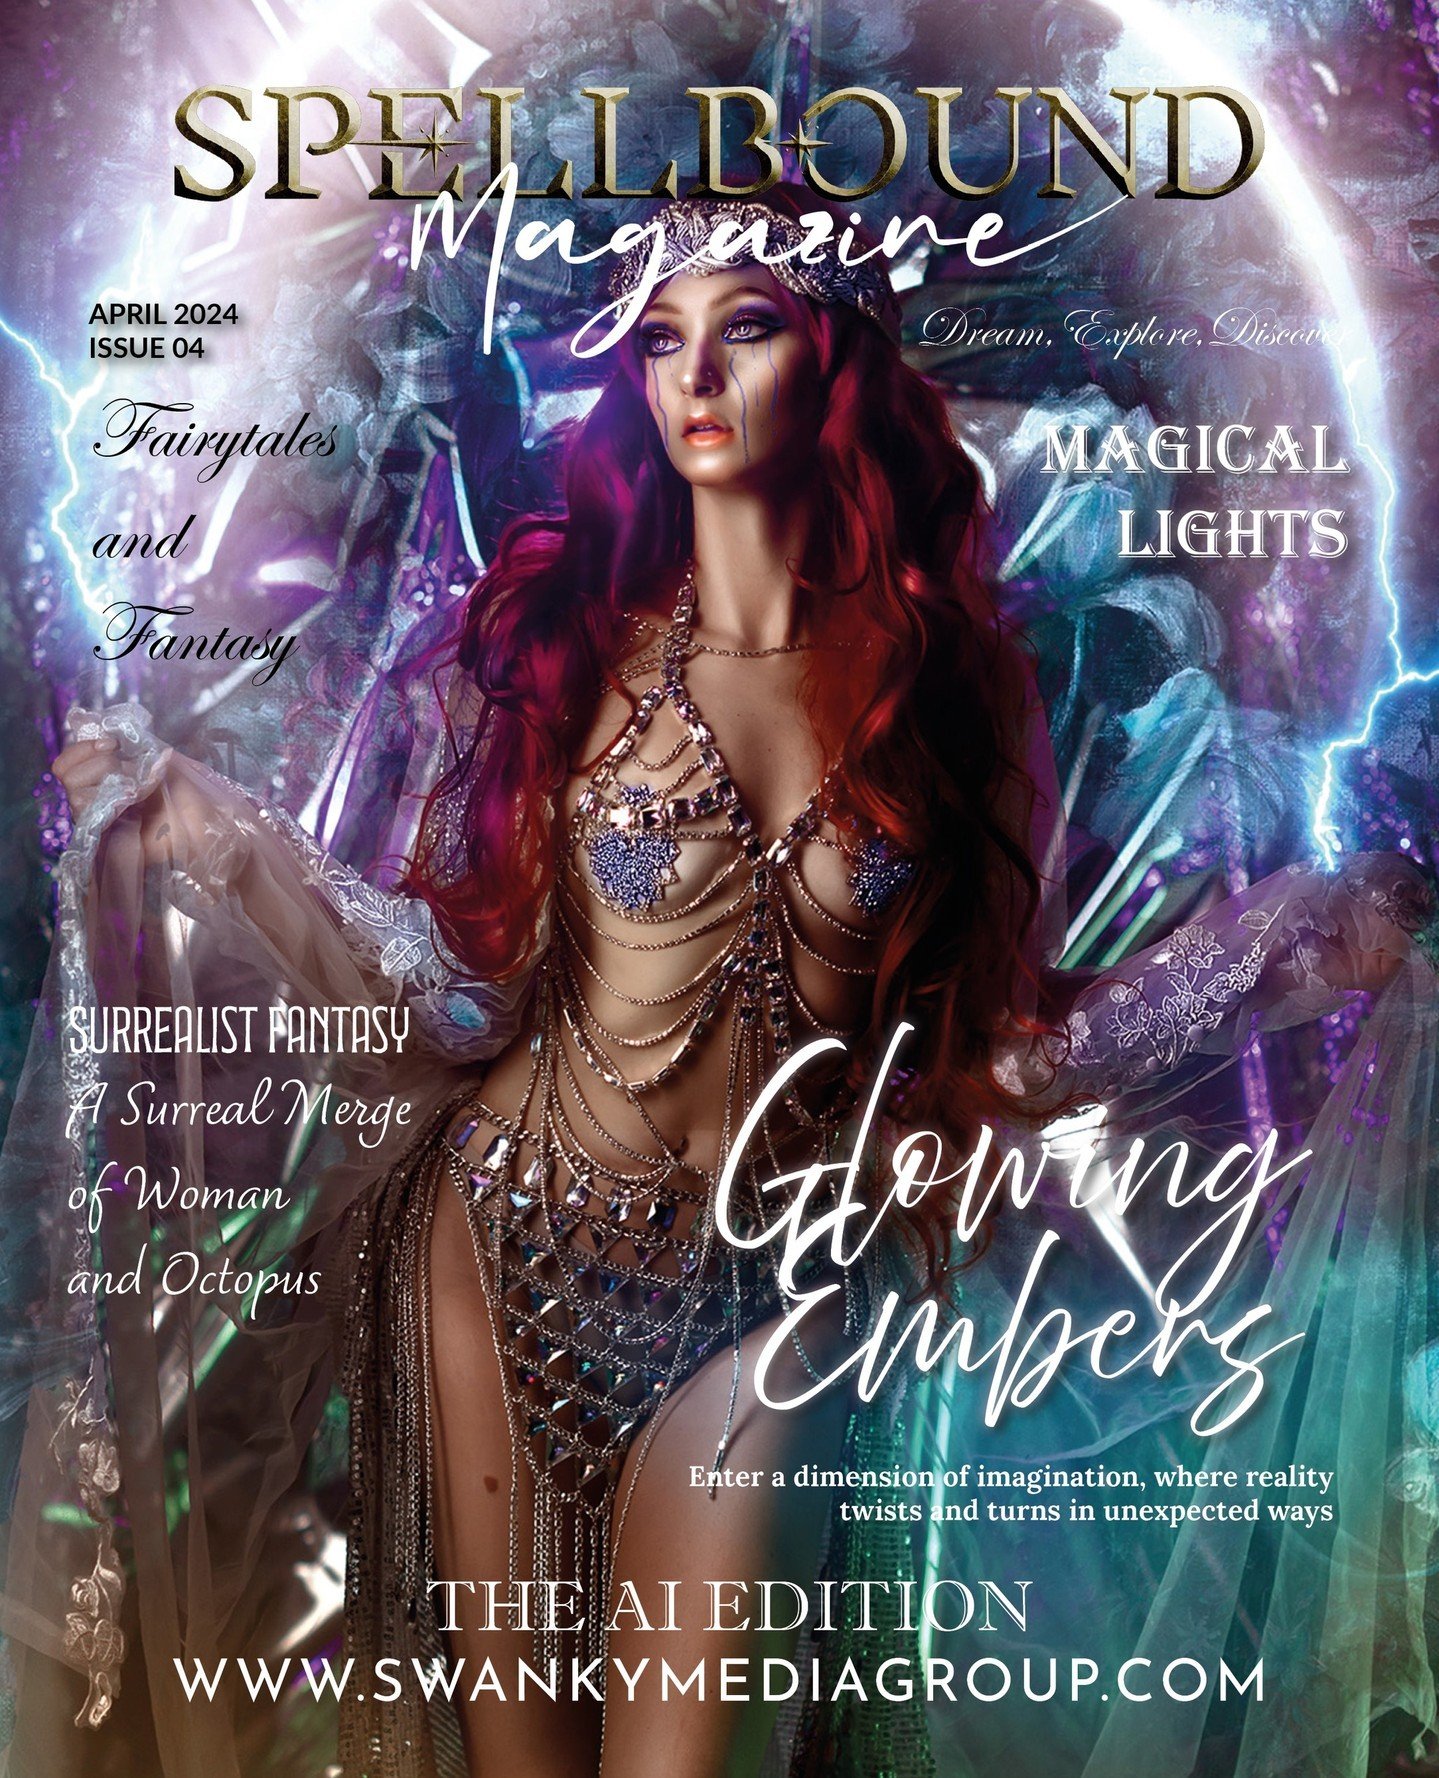 OUR APRIL ISSUES HAVE NOW ARRIVED! 💜⁠
⁠
Spellbound Fairytales and Fantasy Magazine - April 2024: The AI Edition Issue 4⁠
⁠
👆🏻 Grab your copy via the link in our bio⁠, by heading to swankygroupworldwide.shop,⁠ or follow the link below! ⁠
⁠
https://